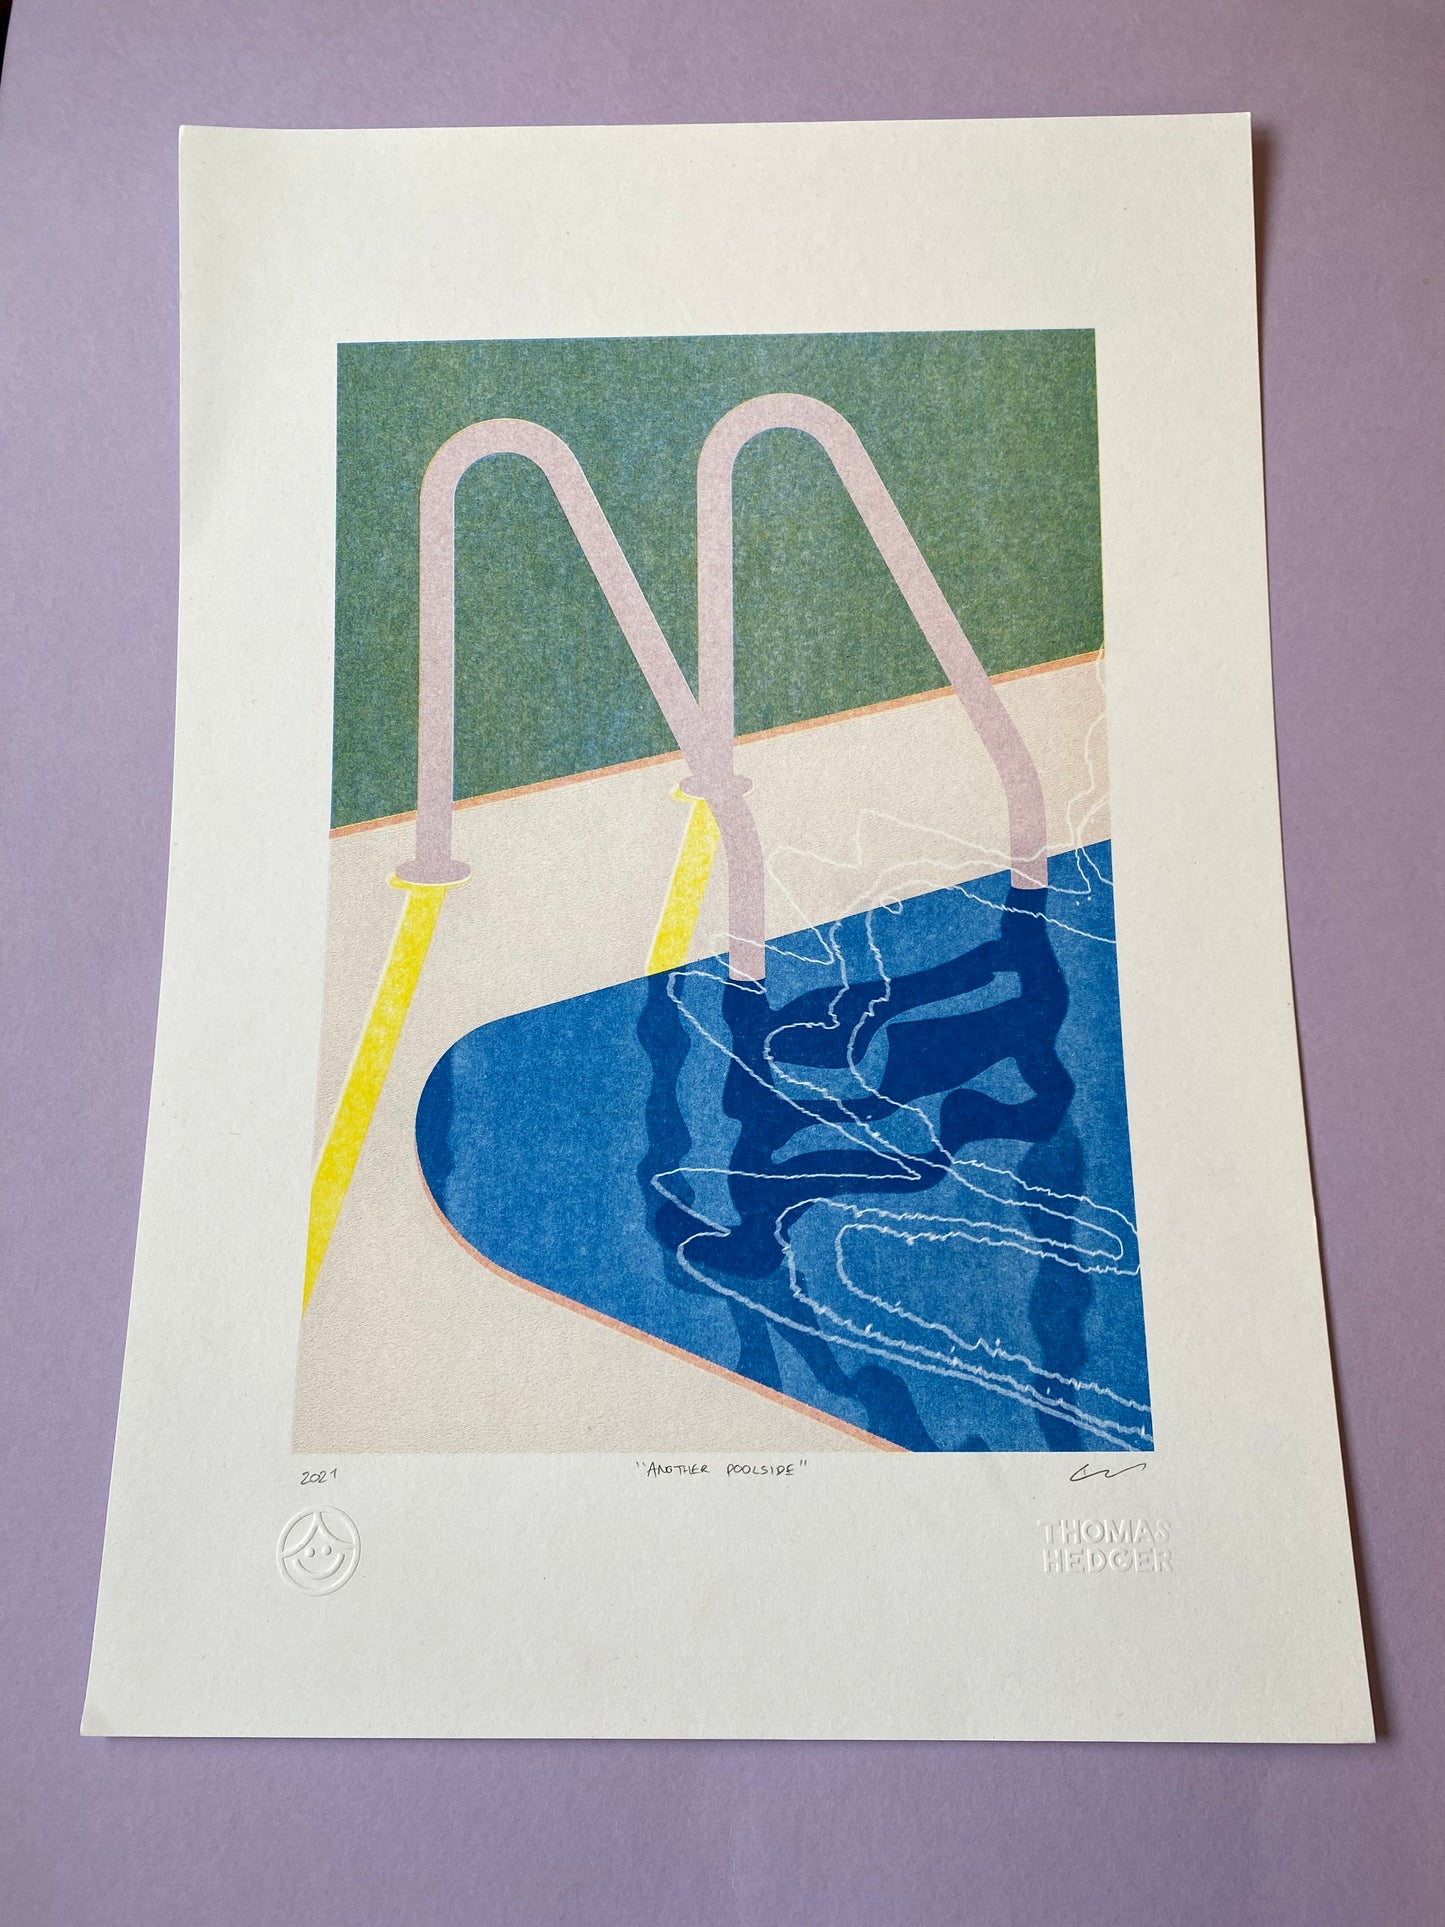 Another Poolside A3 Riso Print by Thomas Hedger